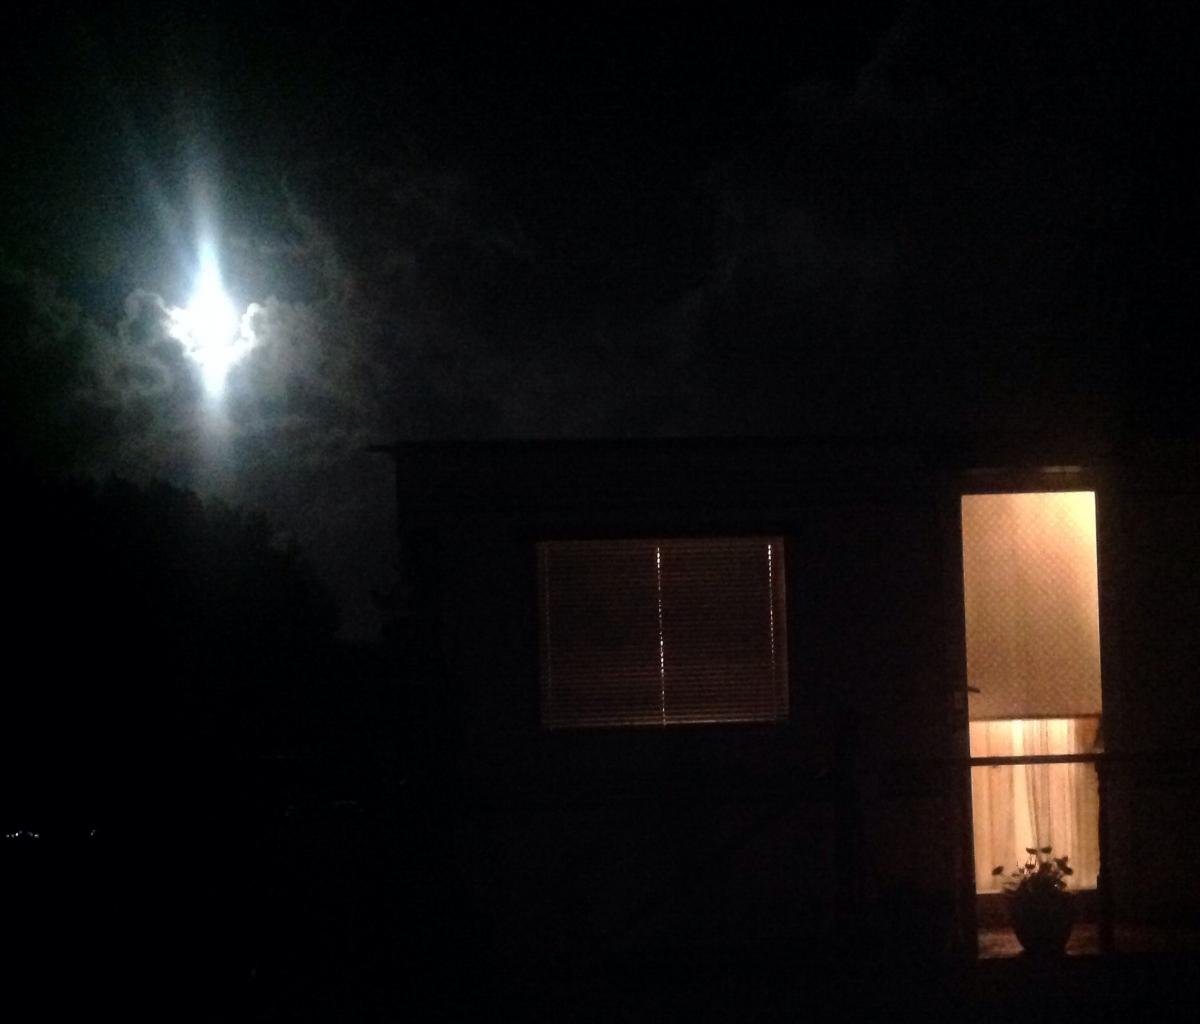 Colin Woodley took this picture of the supermoon over Three Ponds Holiday Park.